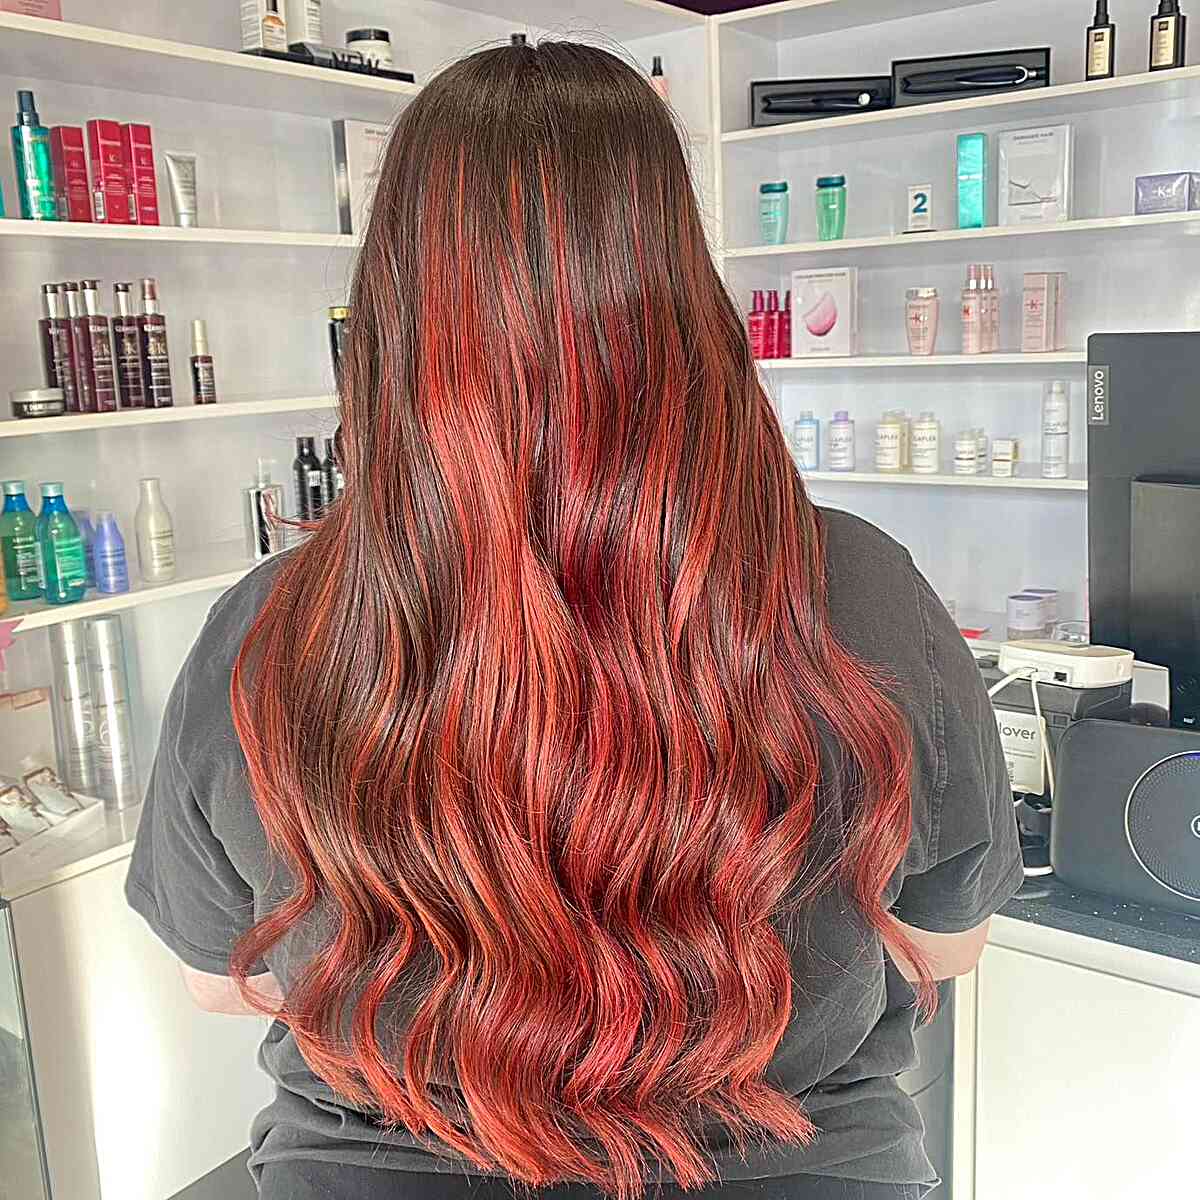 Long Wavy Balayage Hair with Vivid Strawberry Red and Brown Roots